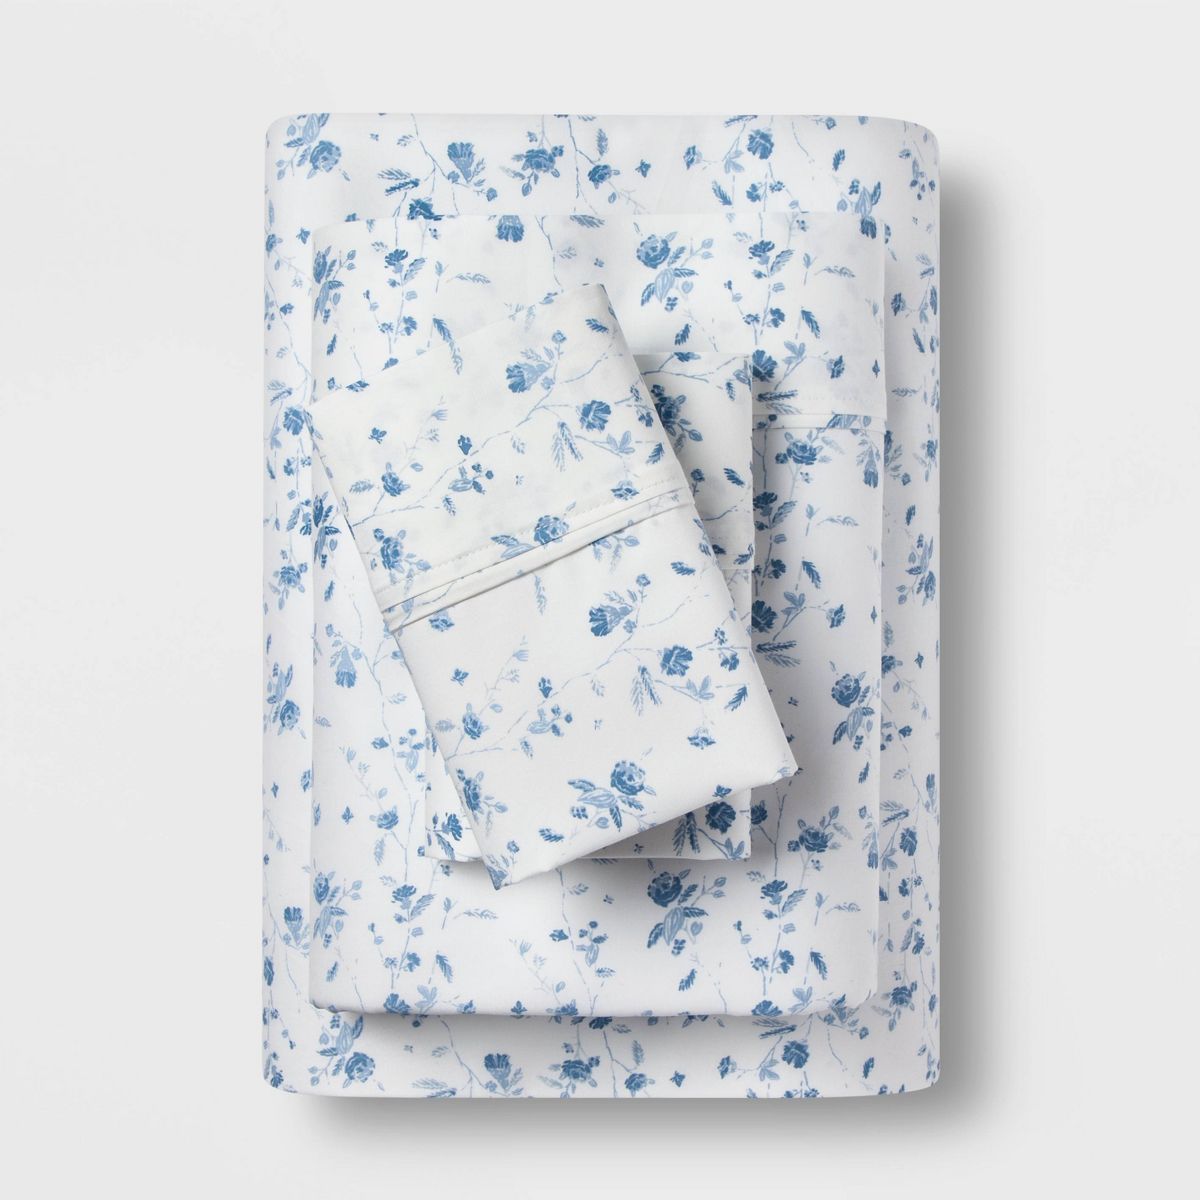 Queen 400 Thread Count Floral Print Cotton Performance Sheet Set White/Blue Floral - Threshold™ | Target